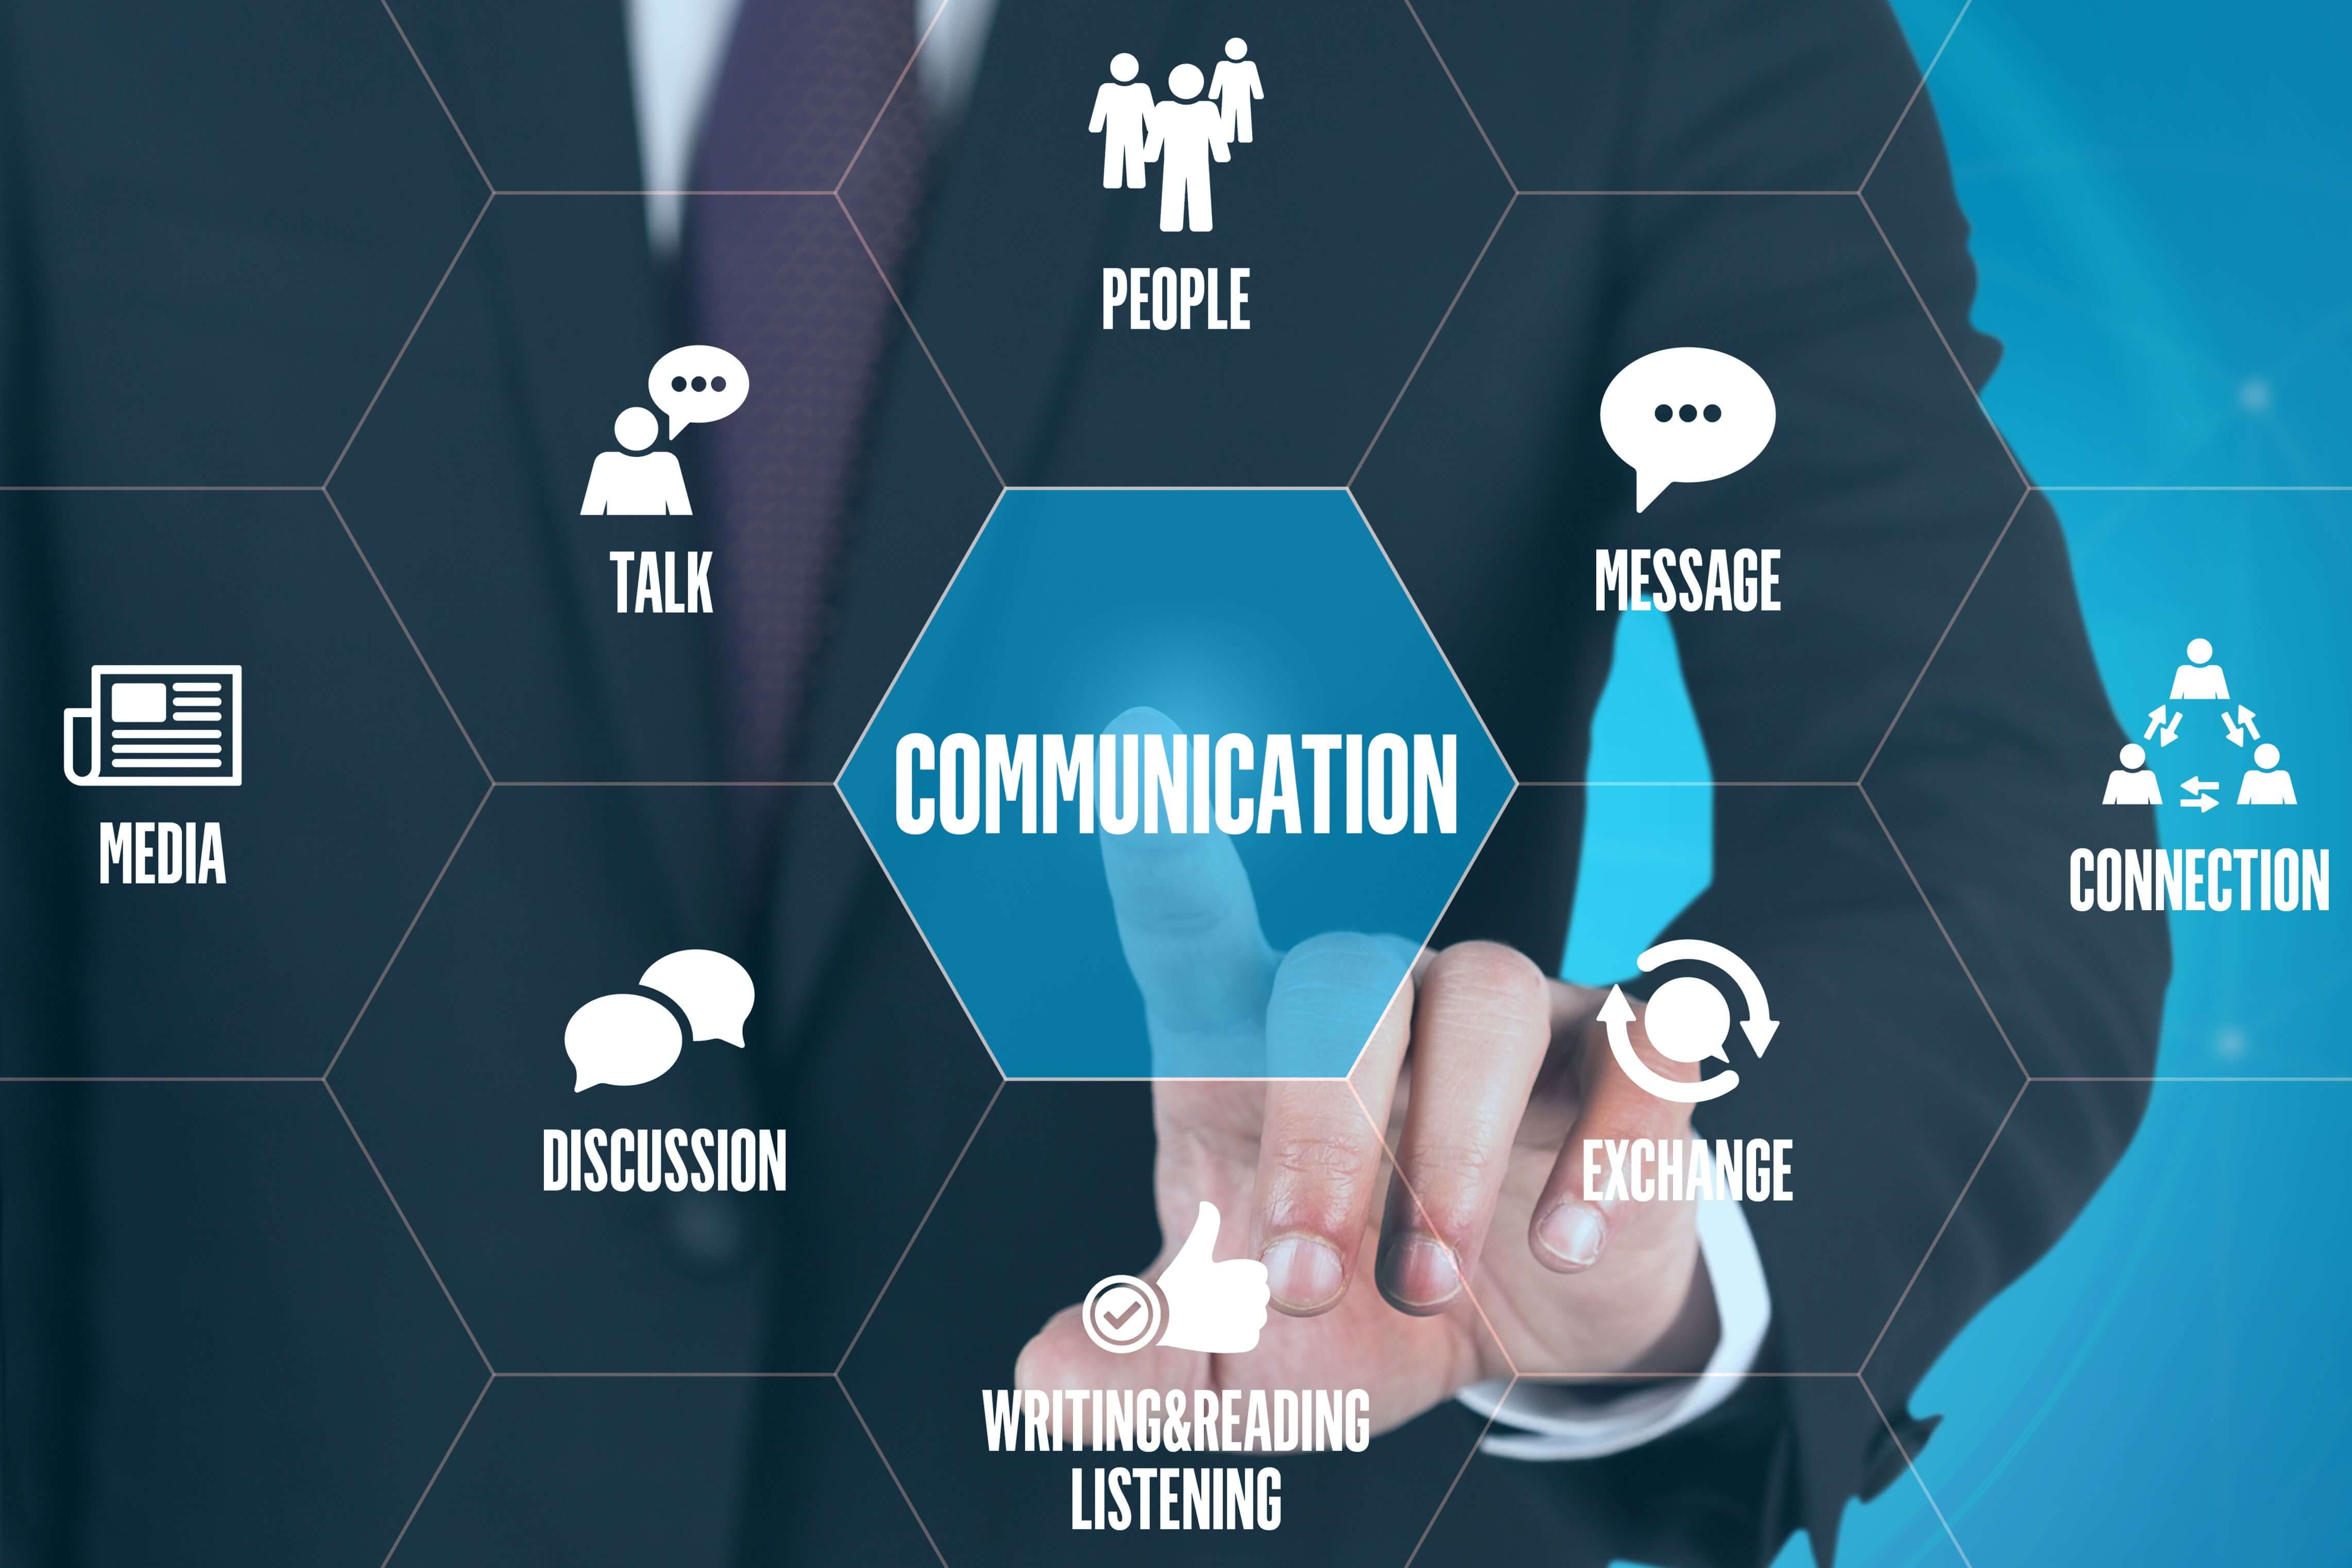 Developing 21st Century Success Through Unified Communications